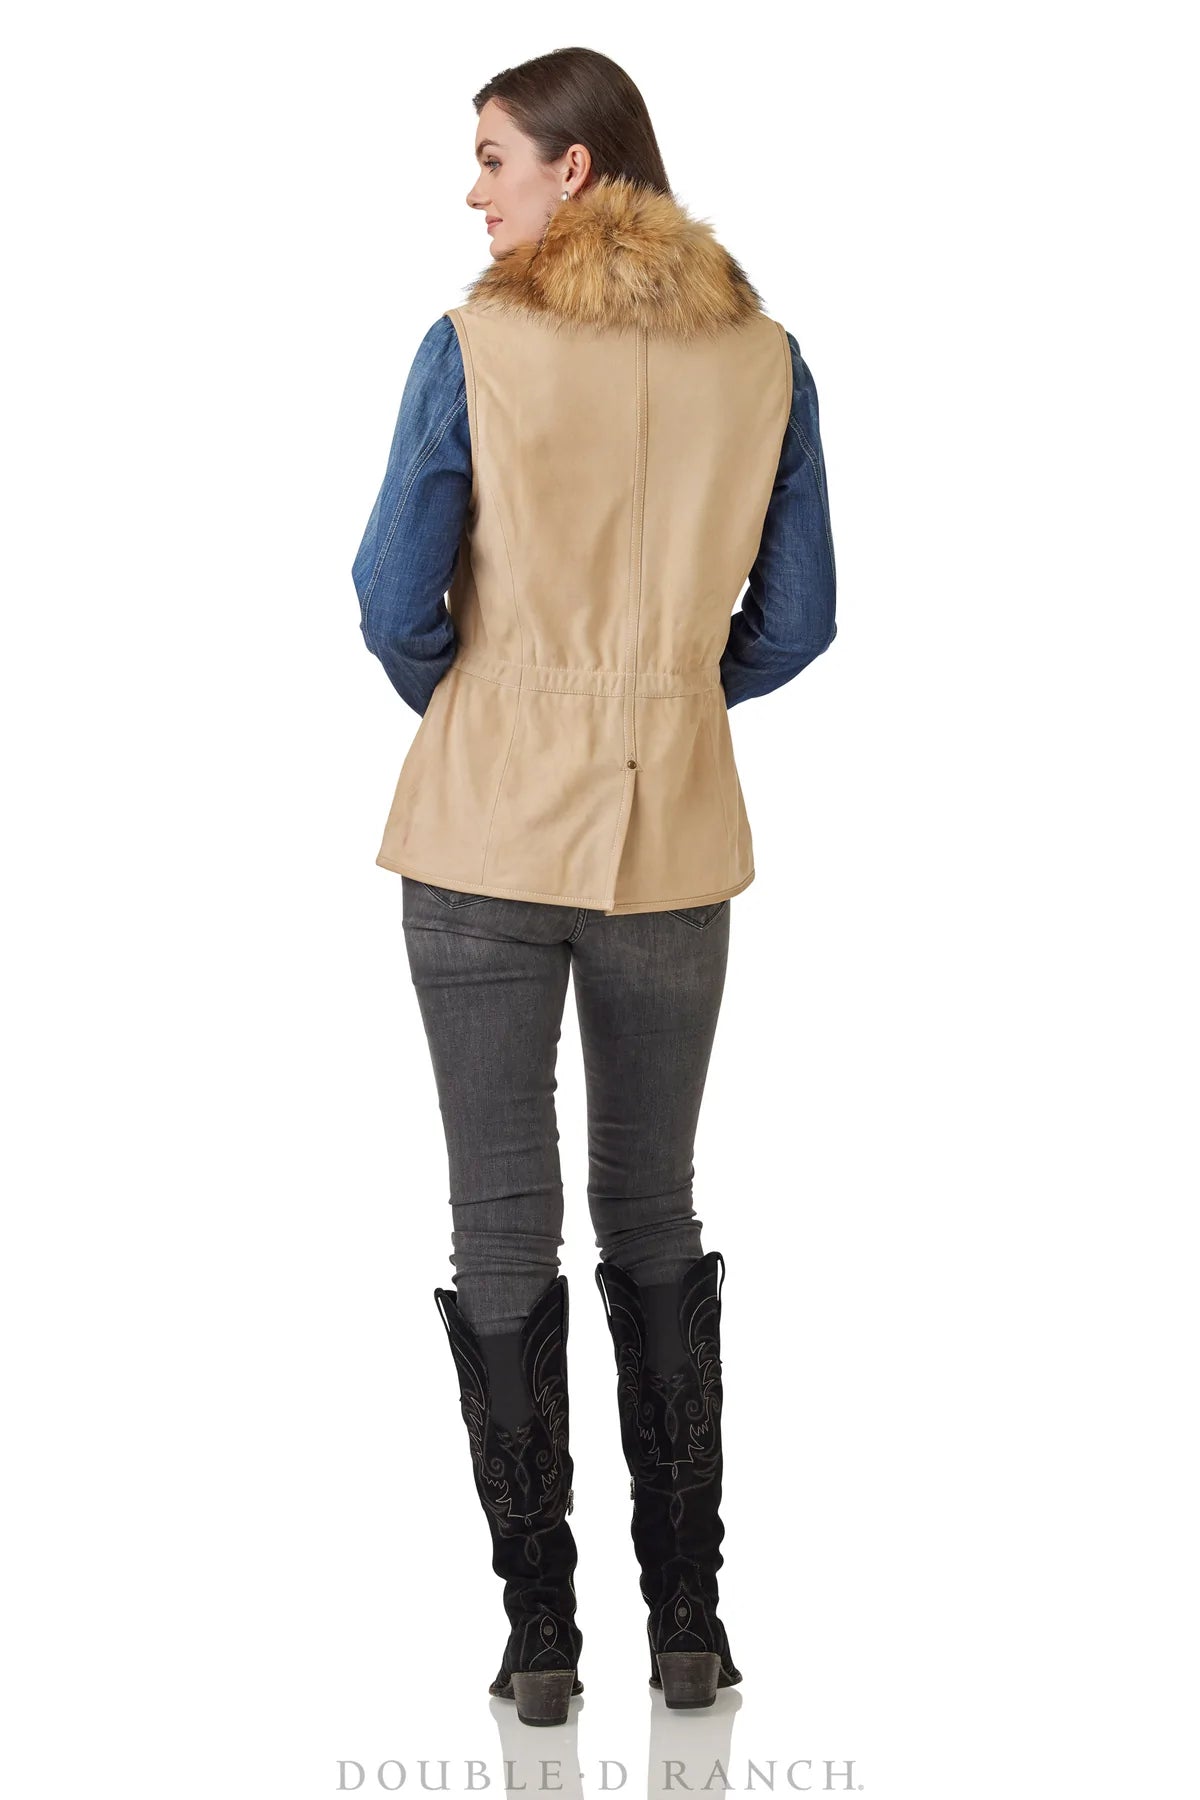 Load image into Gallery viewer, DDR Hondo Vest in Trail Dust Tan at 6Whiskey six whisky double d ranch eloise and walker fall collection V977 goat suede and racoon fur back
